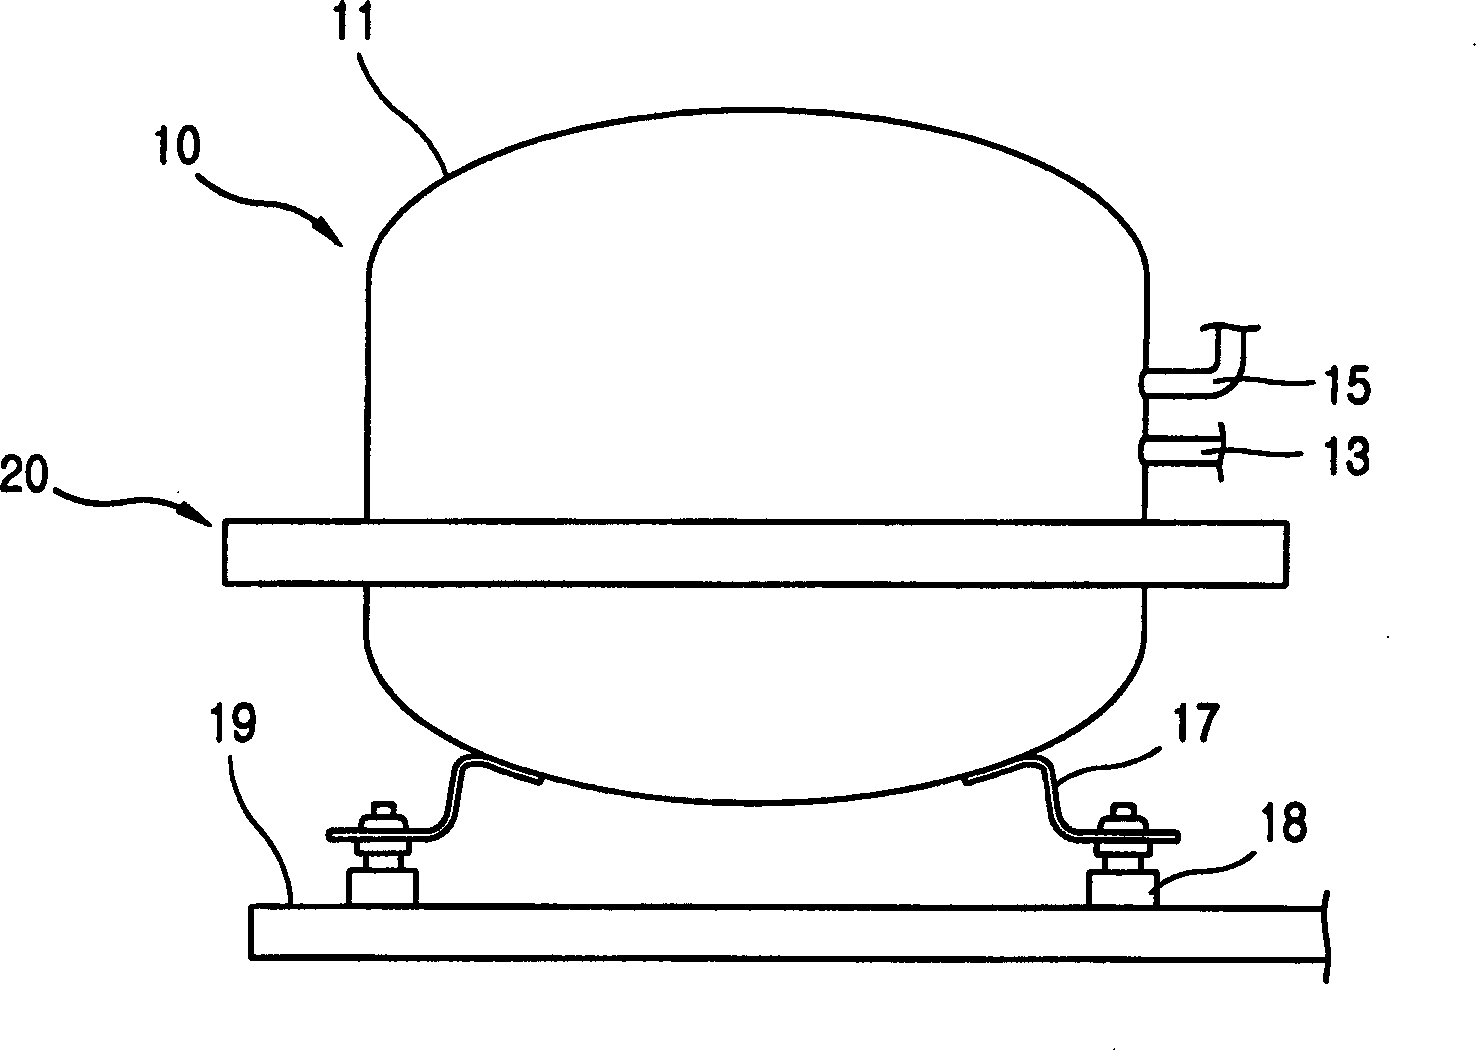 Apparatus for absorbing vibration of compressor